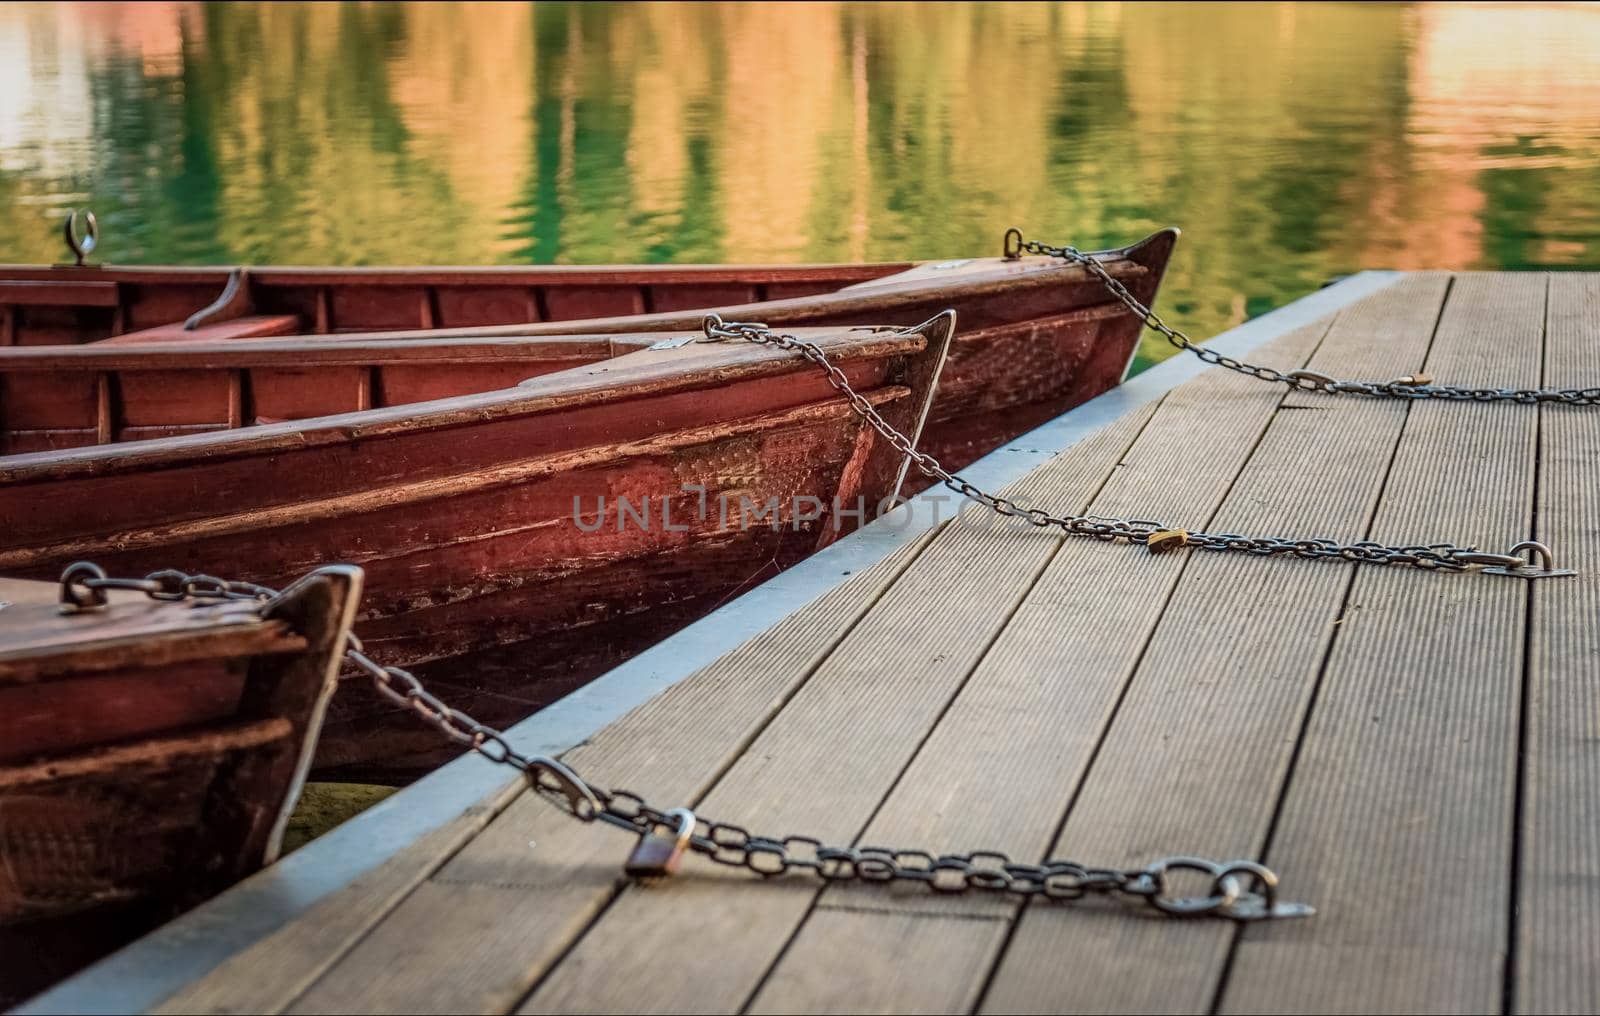 Boat chains on the dock, close up of boat chains, two wooden boats on the dock, Rope knots on the teak deck of a vintage wooden sailboat yacht by isaiphoto